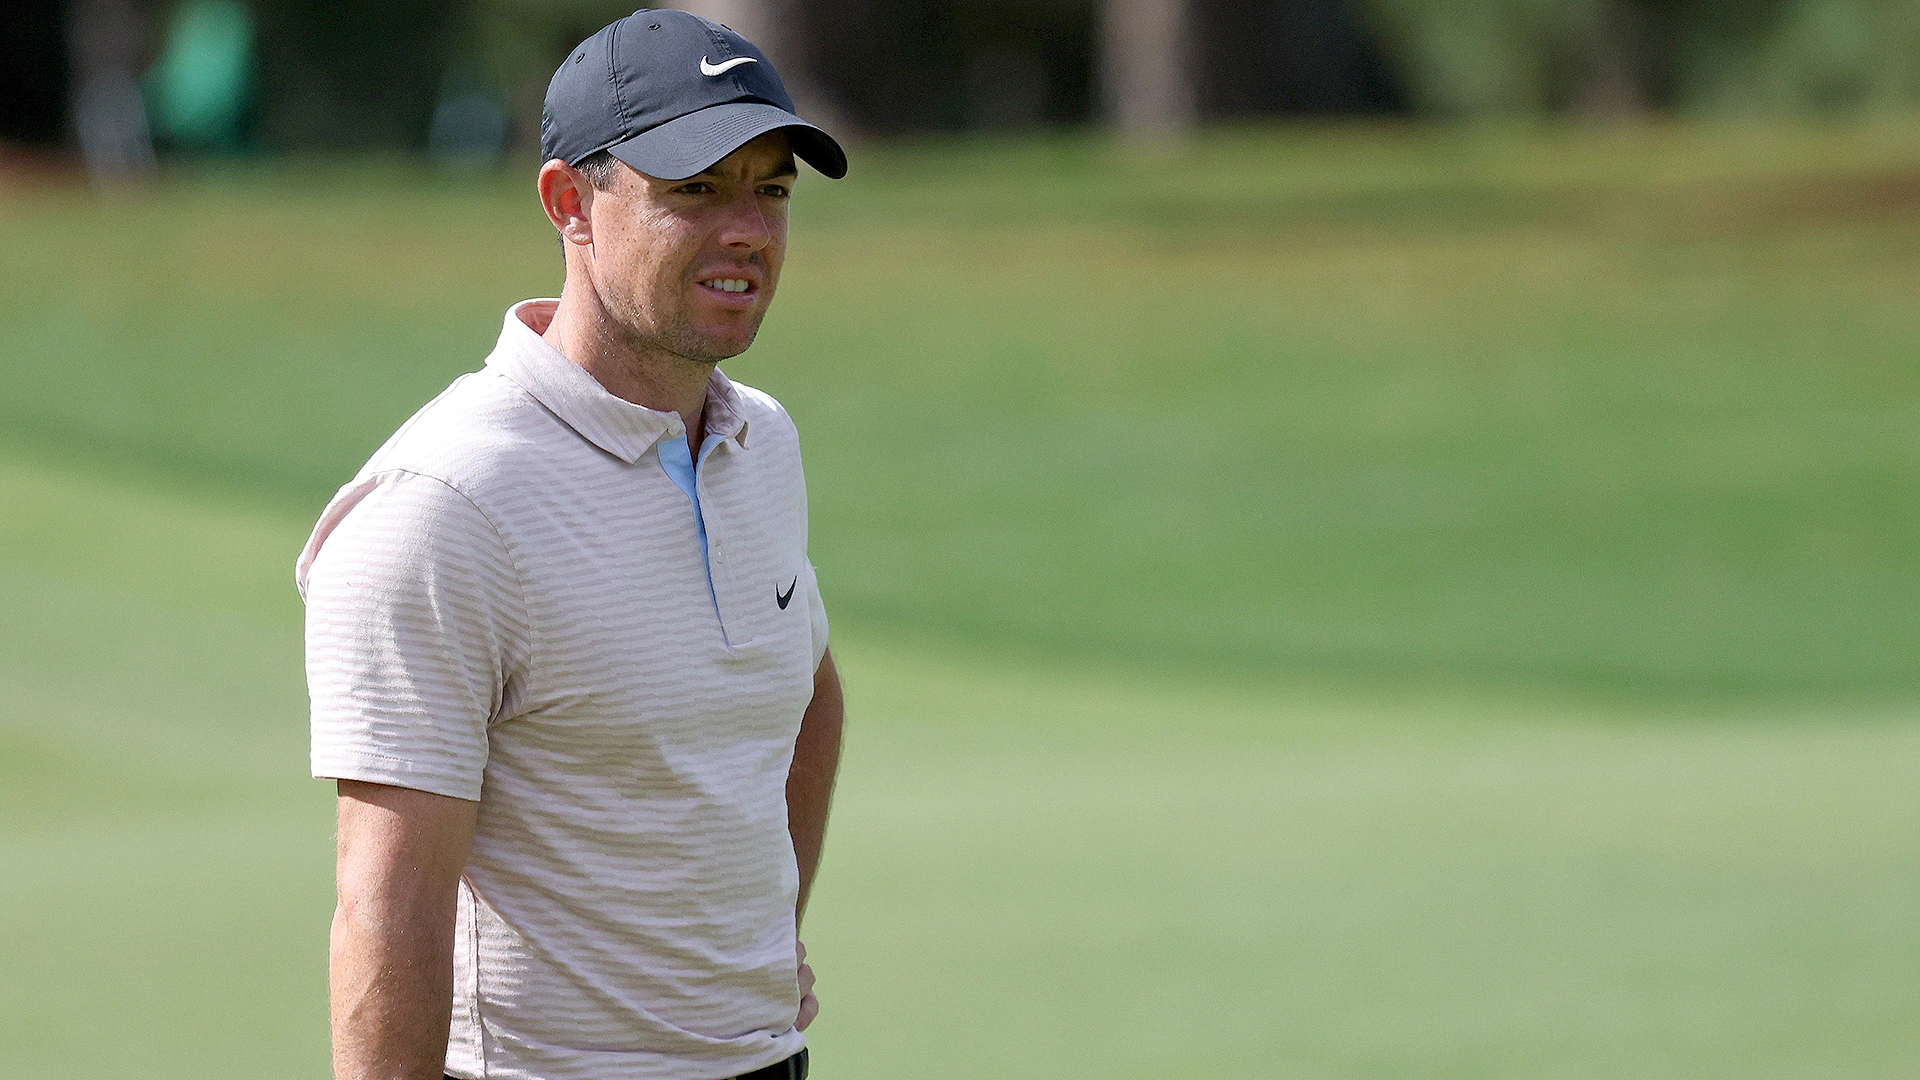 Rory McIlroy gets yet another backdoor top-10 at Masters